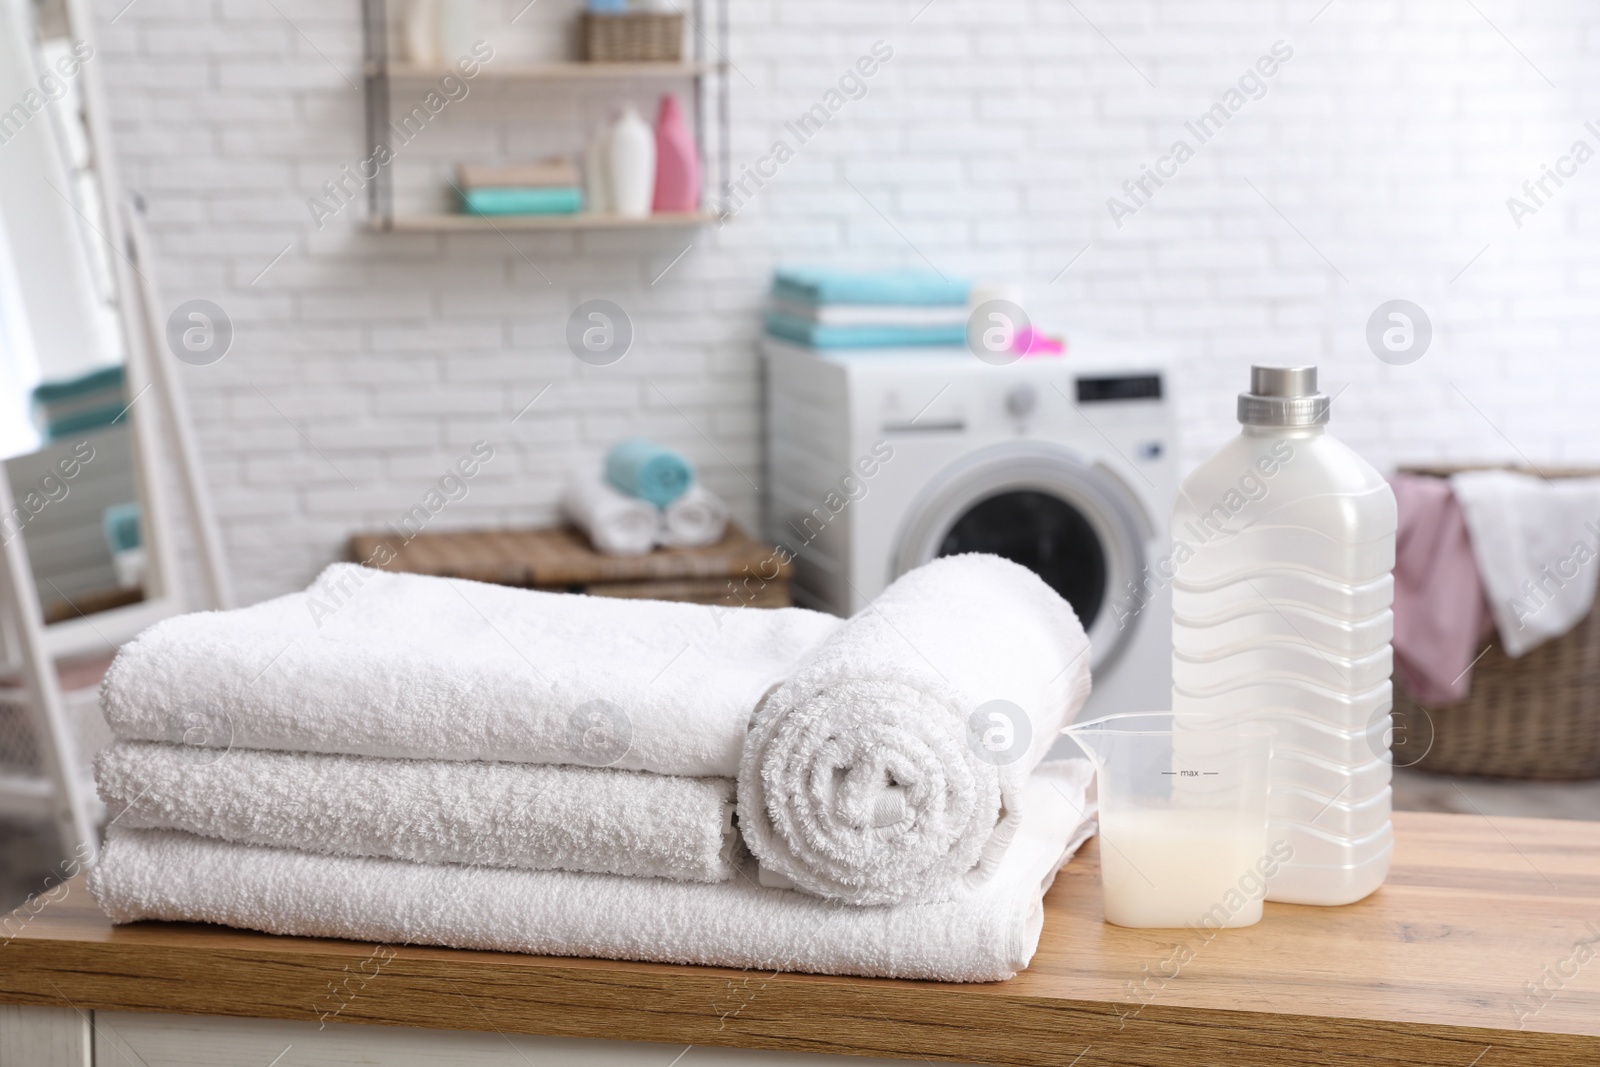 Photo of Soft bath towels and detergent on table against blurred background